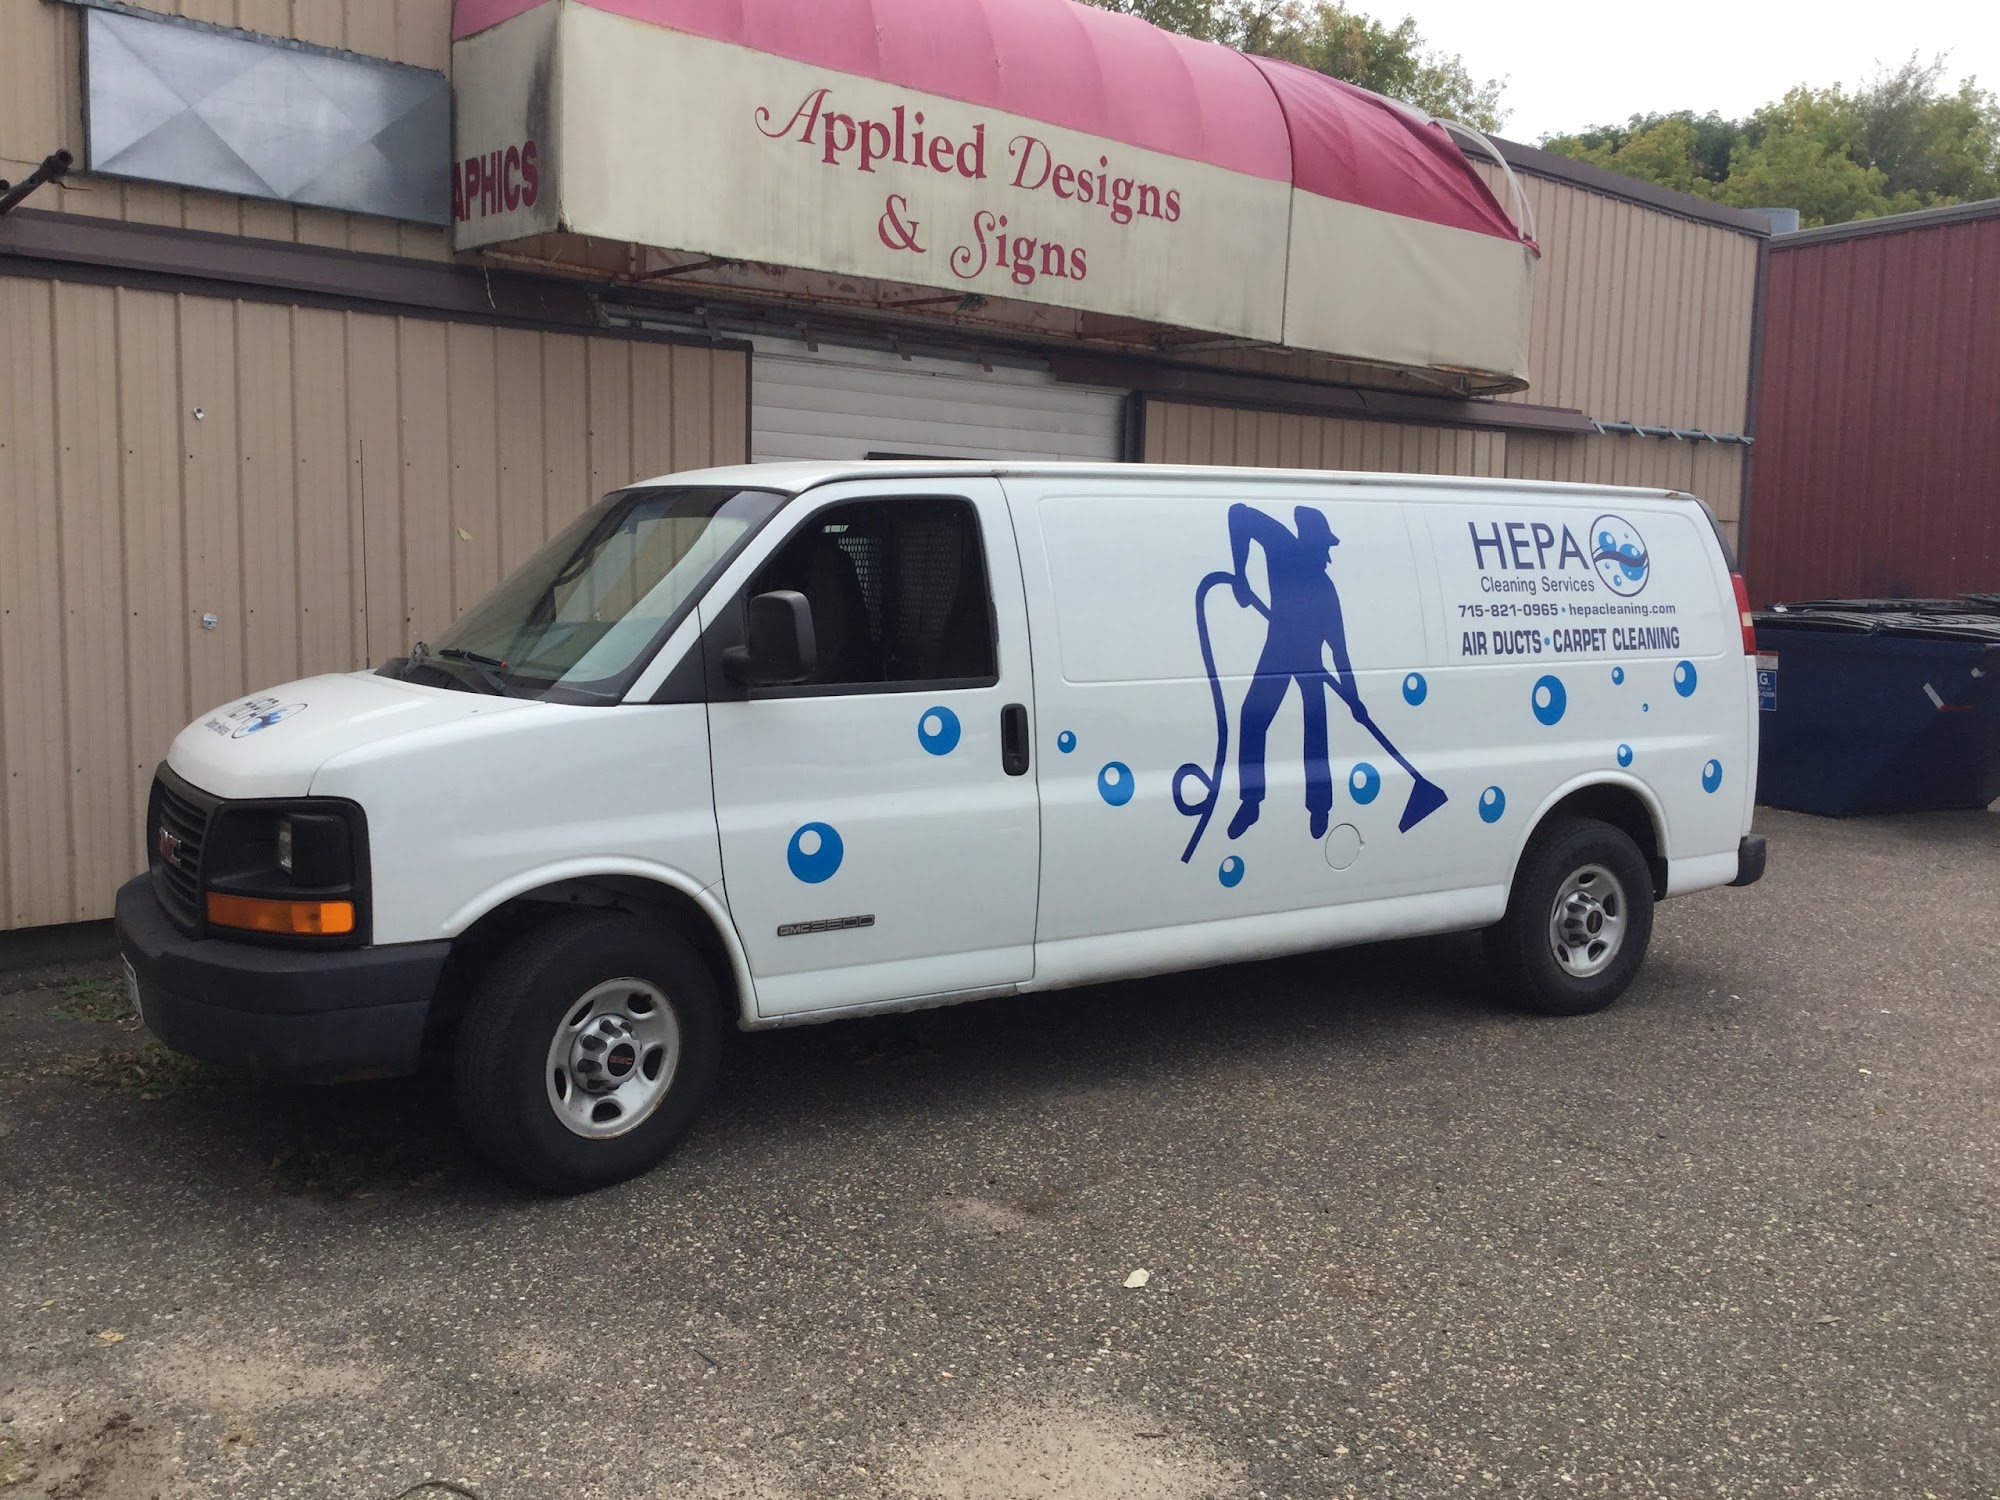 Hepa Cleaning Services 109 N Main St suite e, River Falls Wisconsin 54022